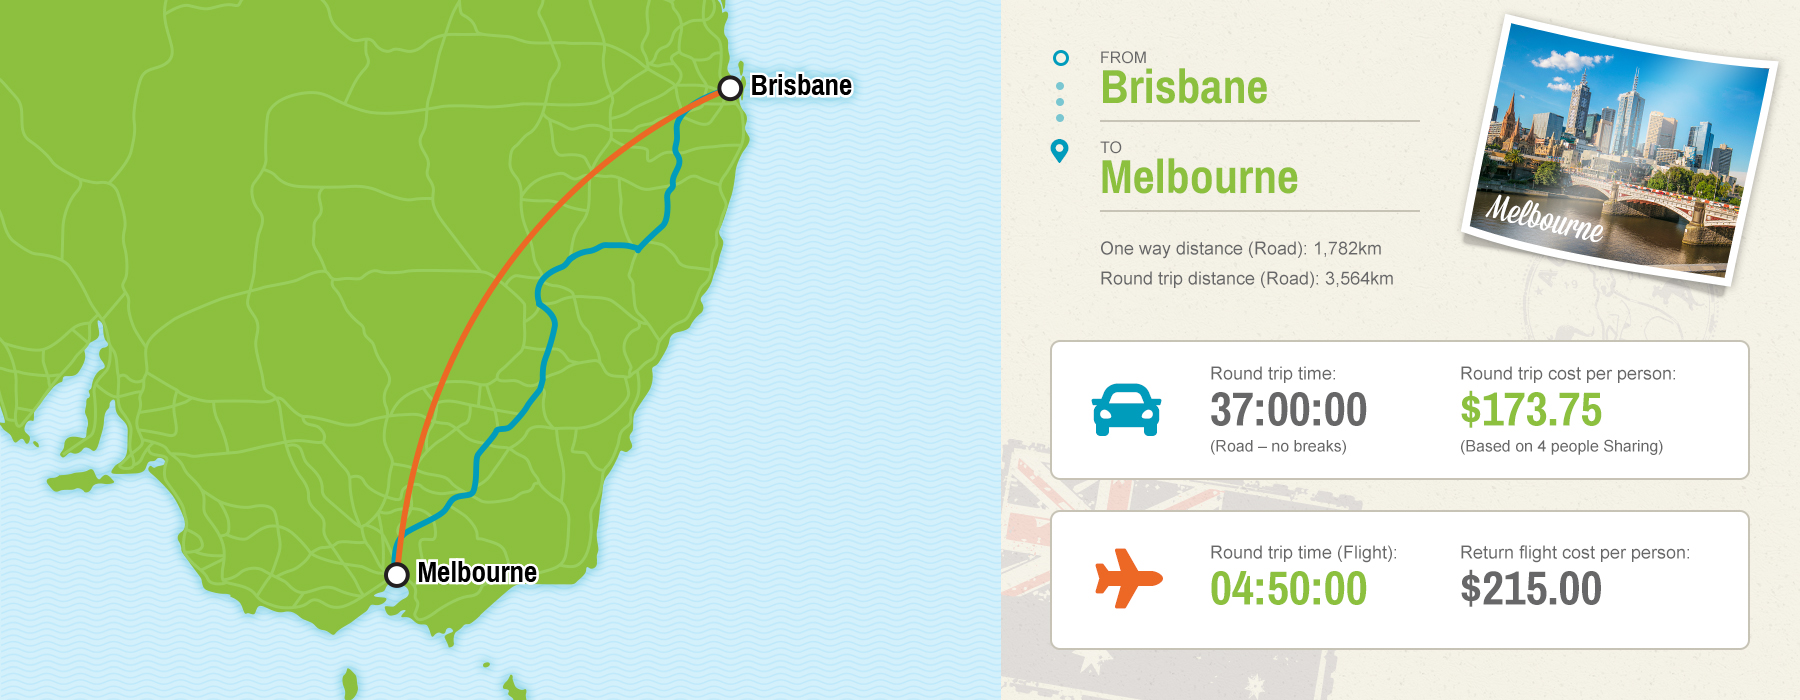 Brisbane to Melbourne map showing driving vs flying